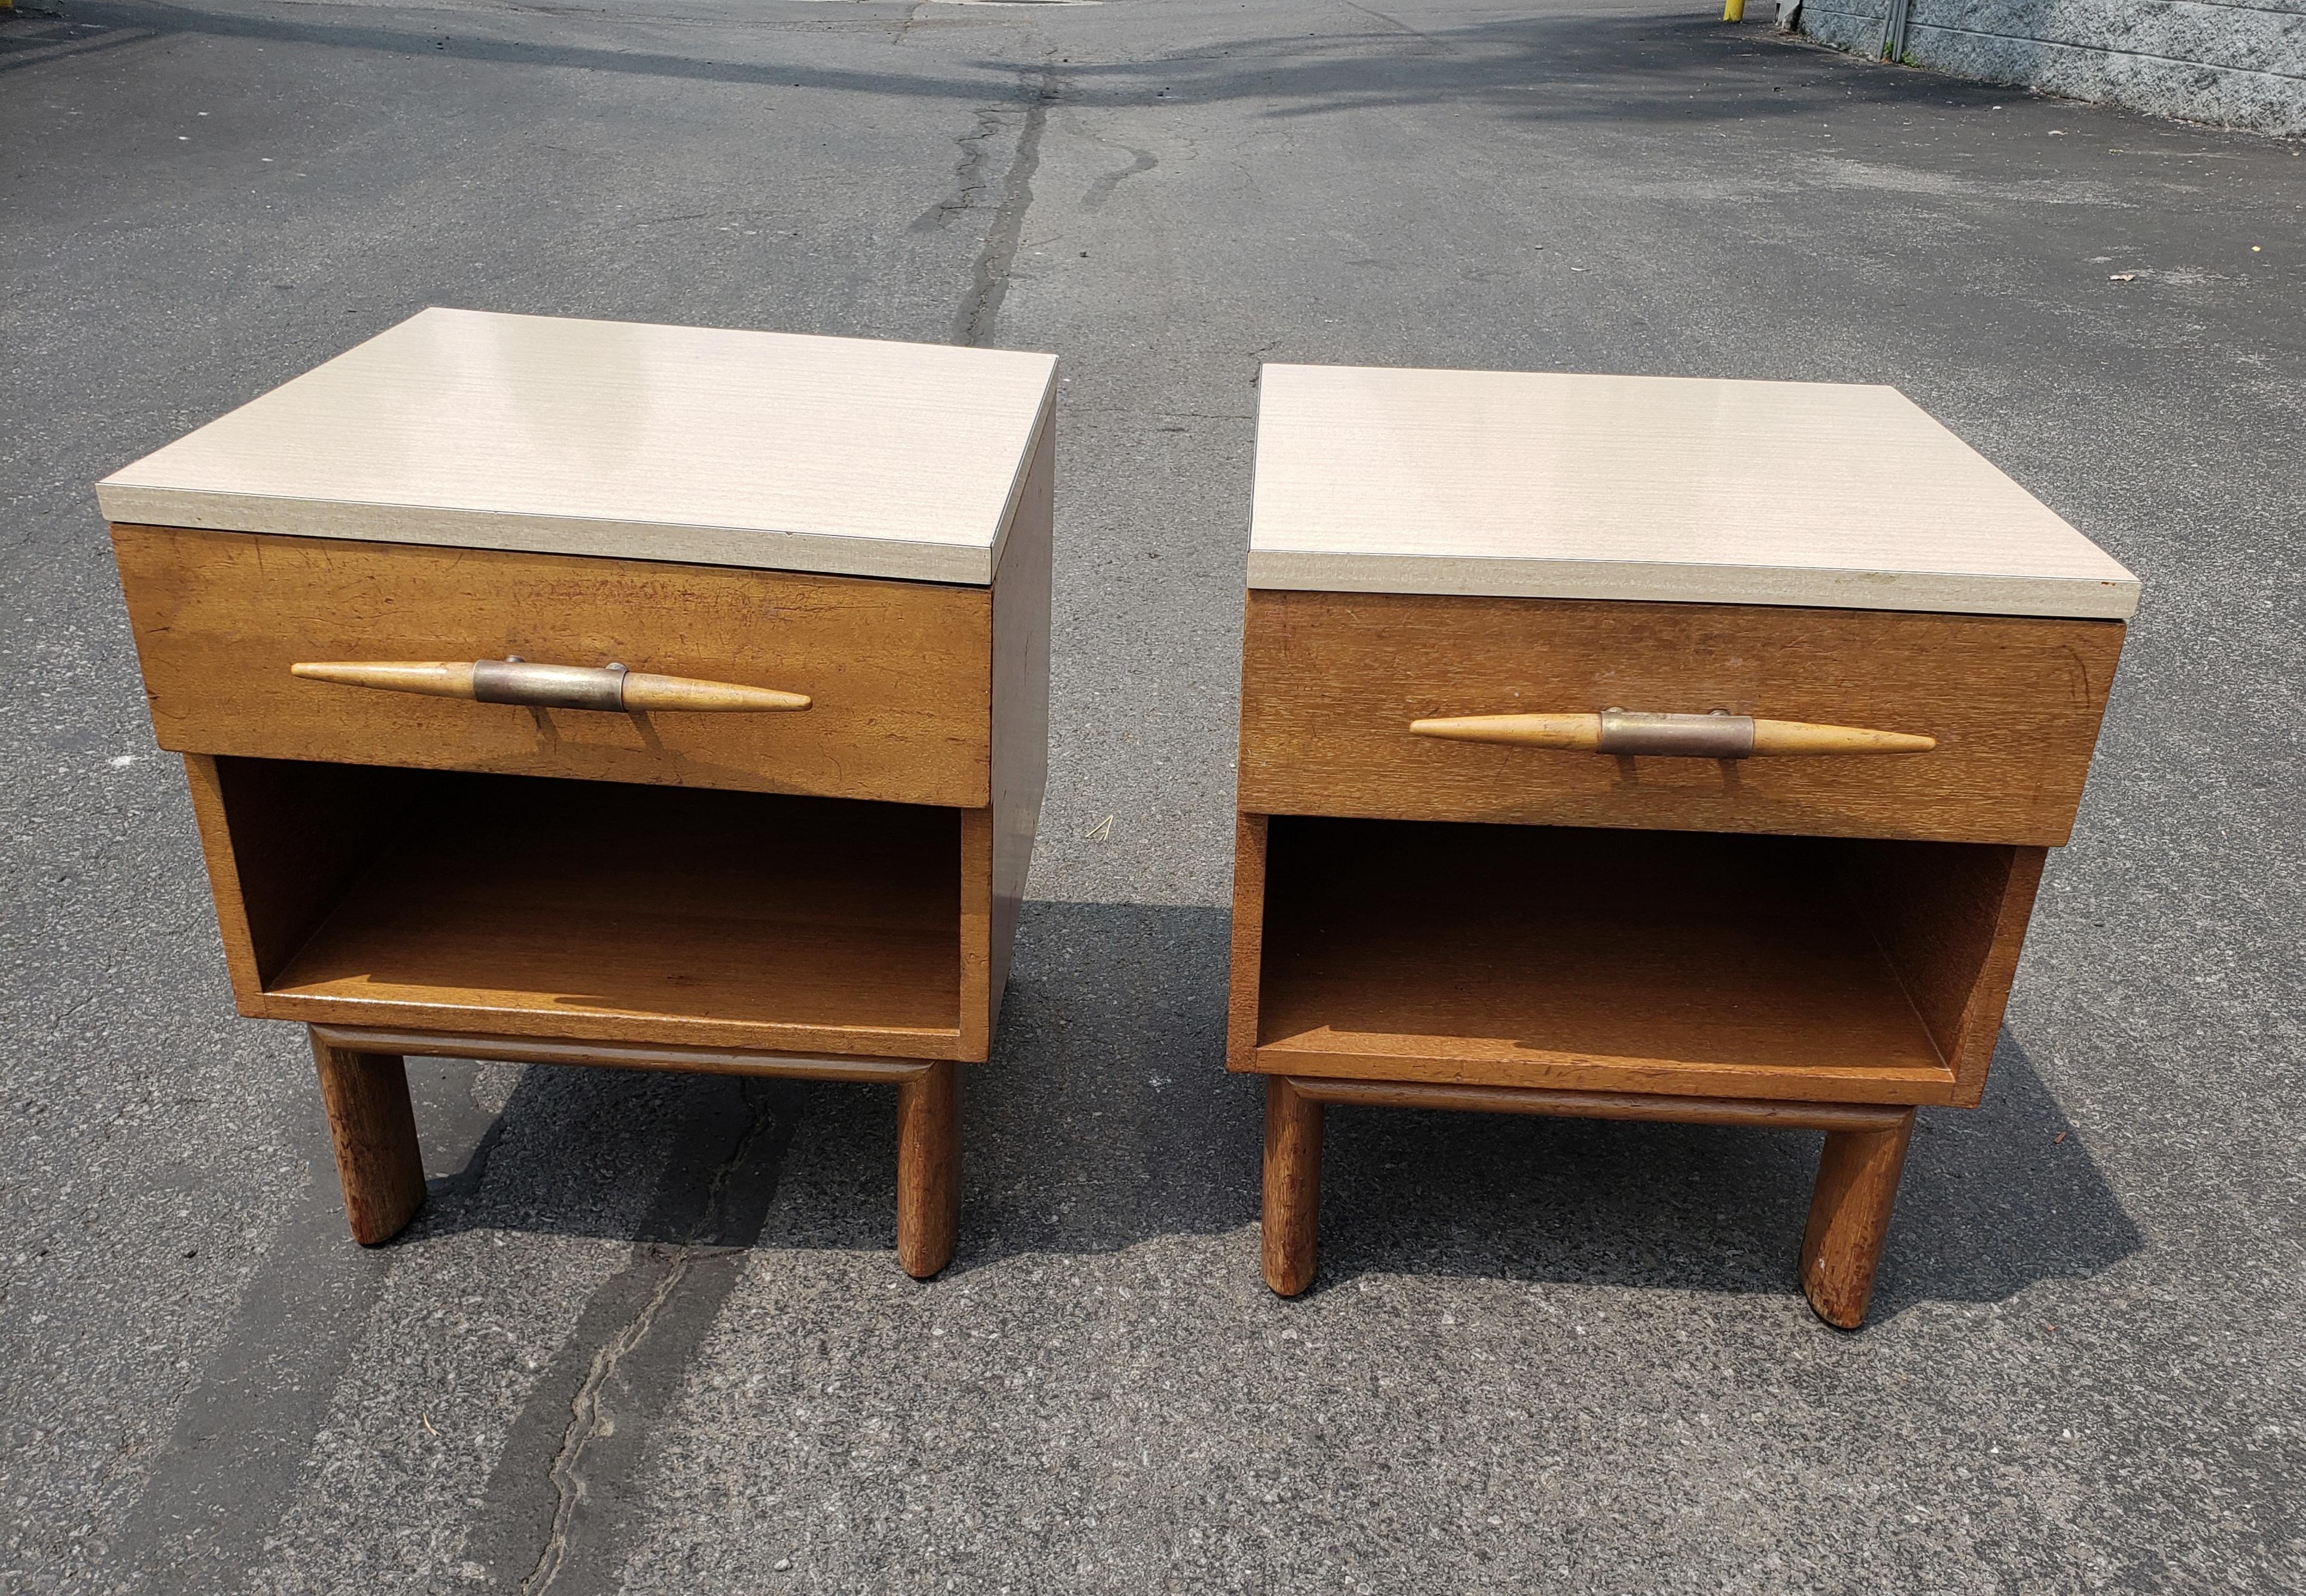 A pair of clean midcentury Brown Saltman blonde mahogany modern nightstands 1950s USA. Blonde mahogany body and very clean formica top.
Exceptionally clean modern lines designed by John Keal. Maker label present.
Shows sculptural thick oval legs